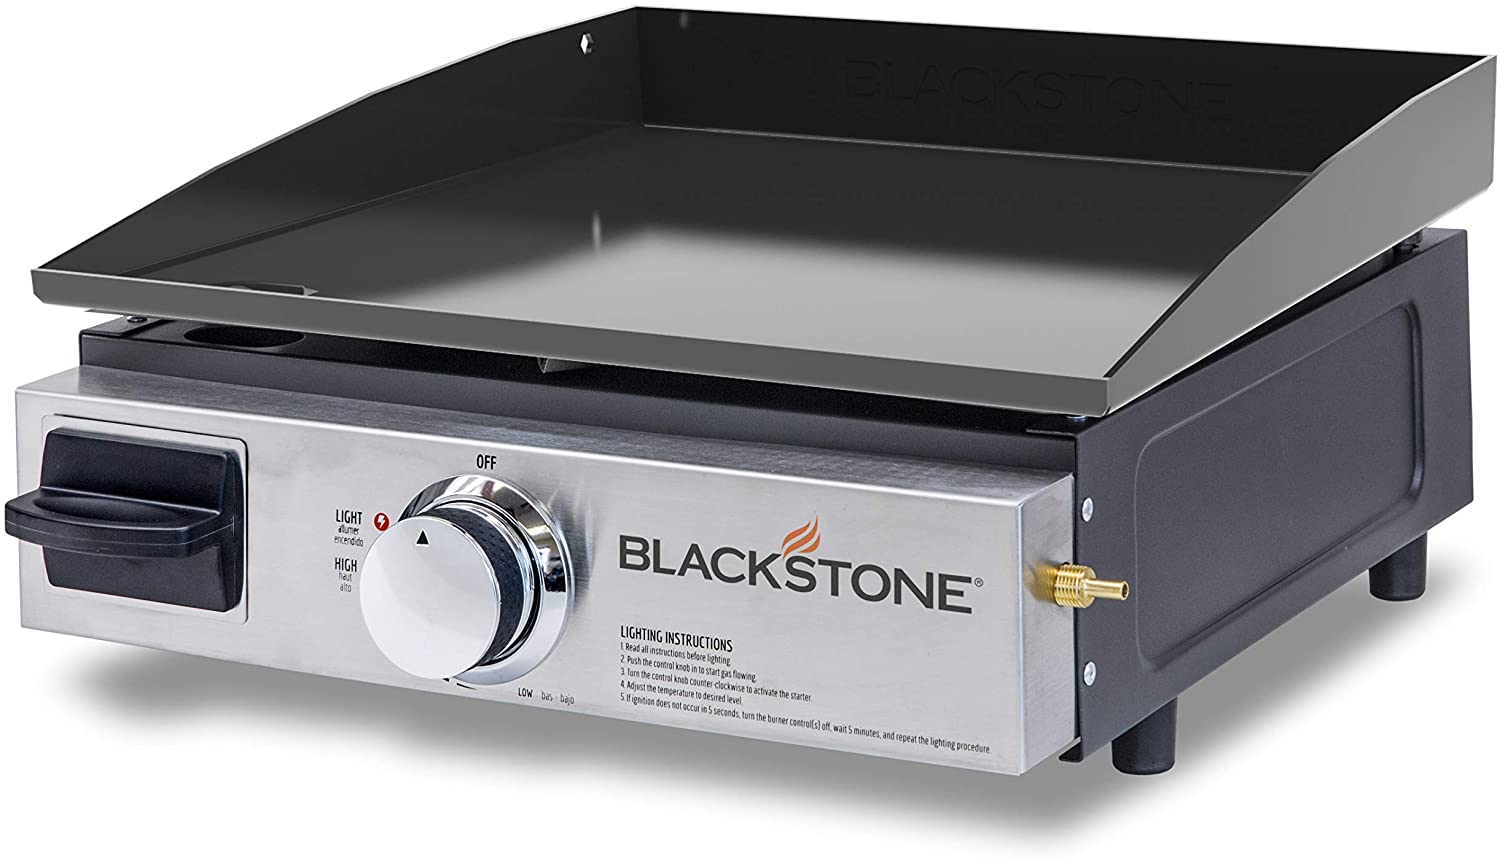 Blackstone Portable Easy Store Gas Griddle, 17-Inch